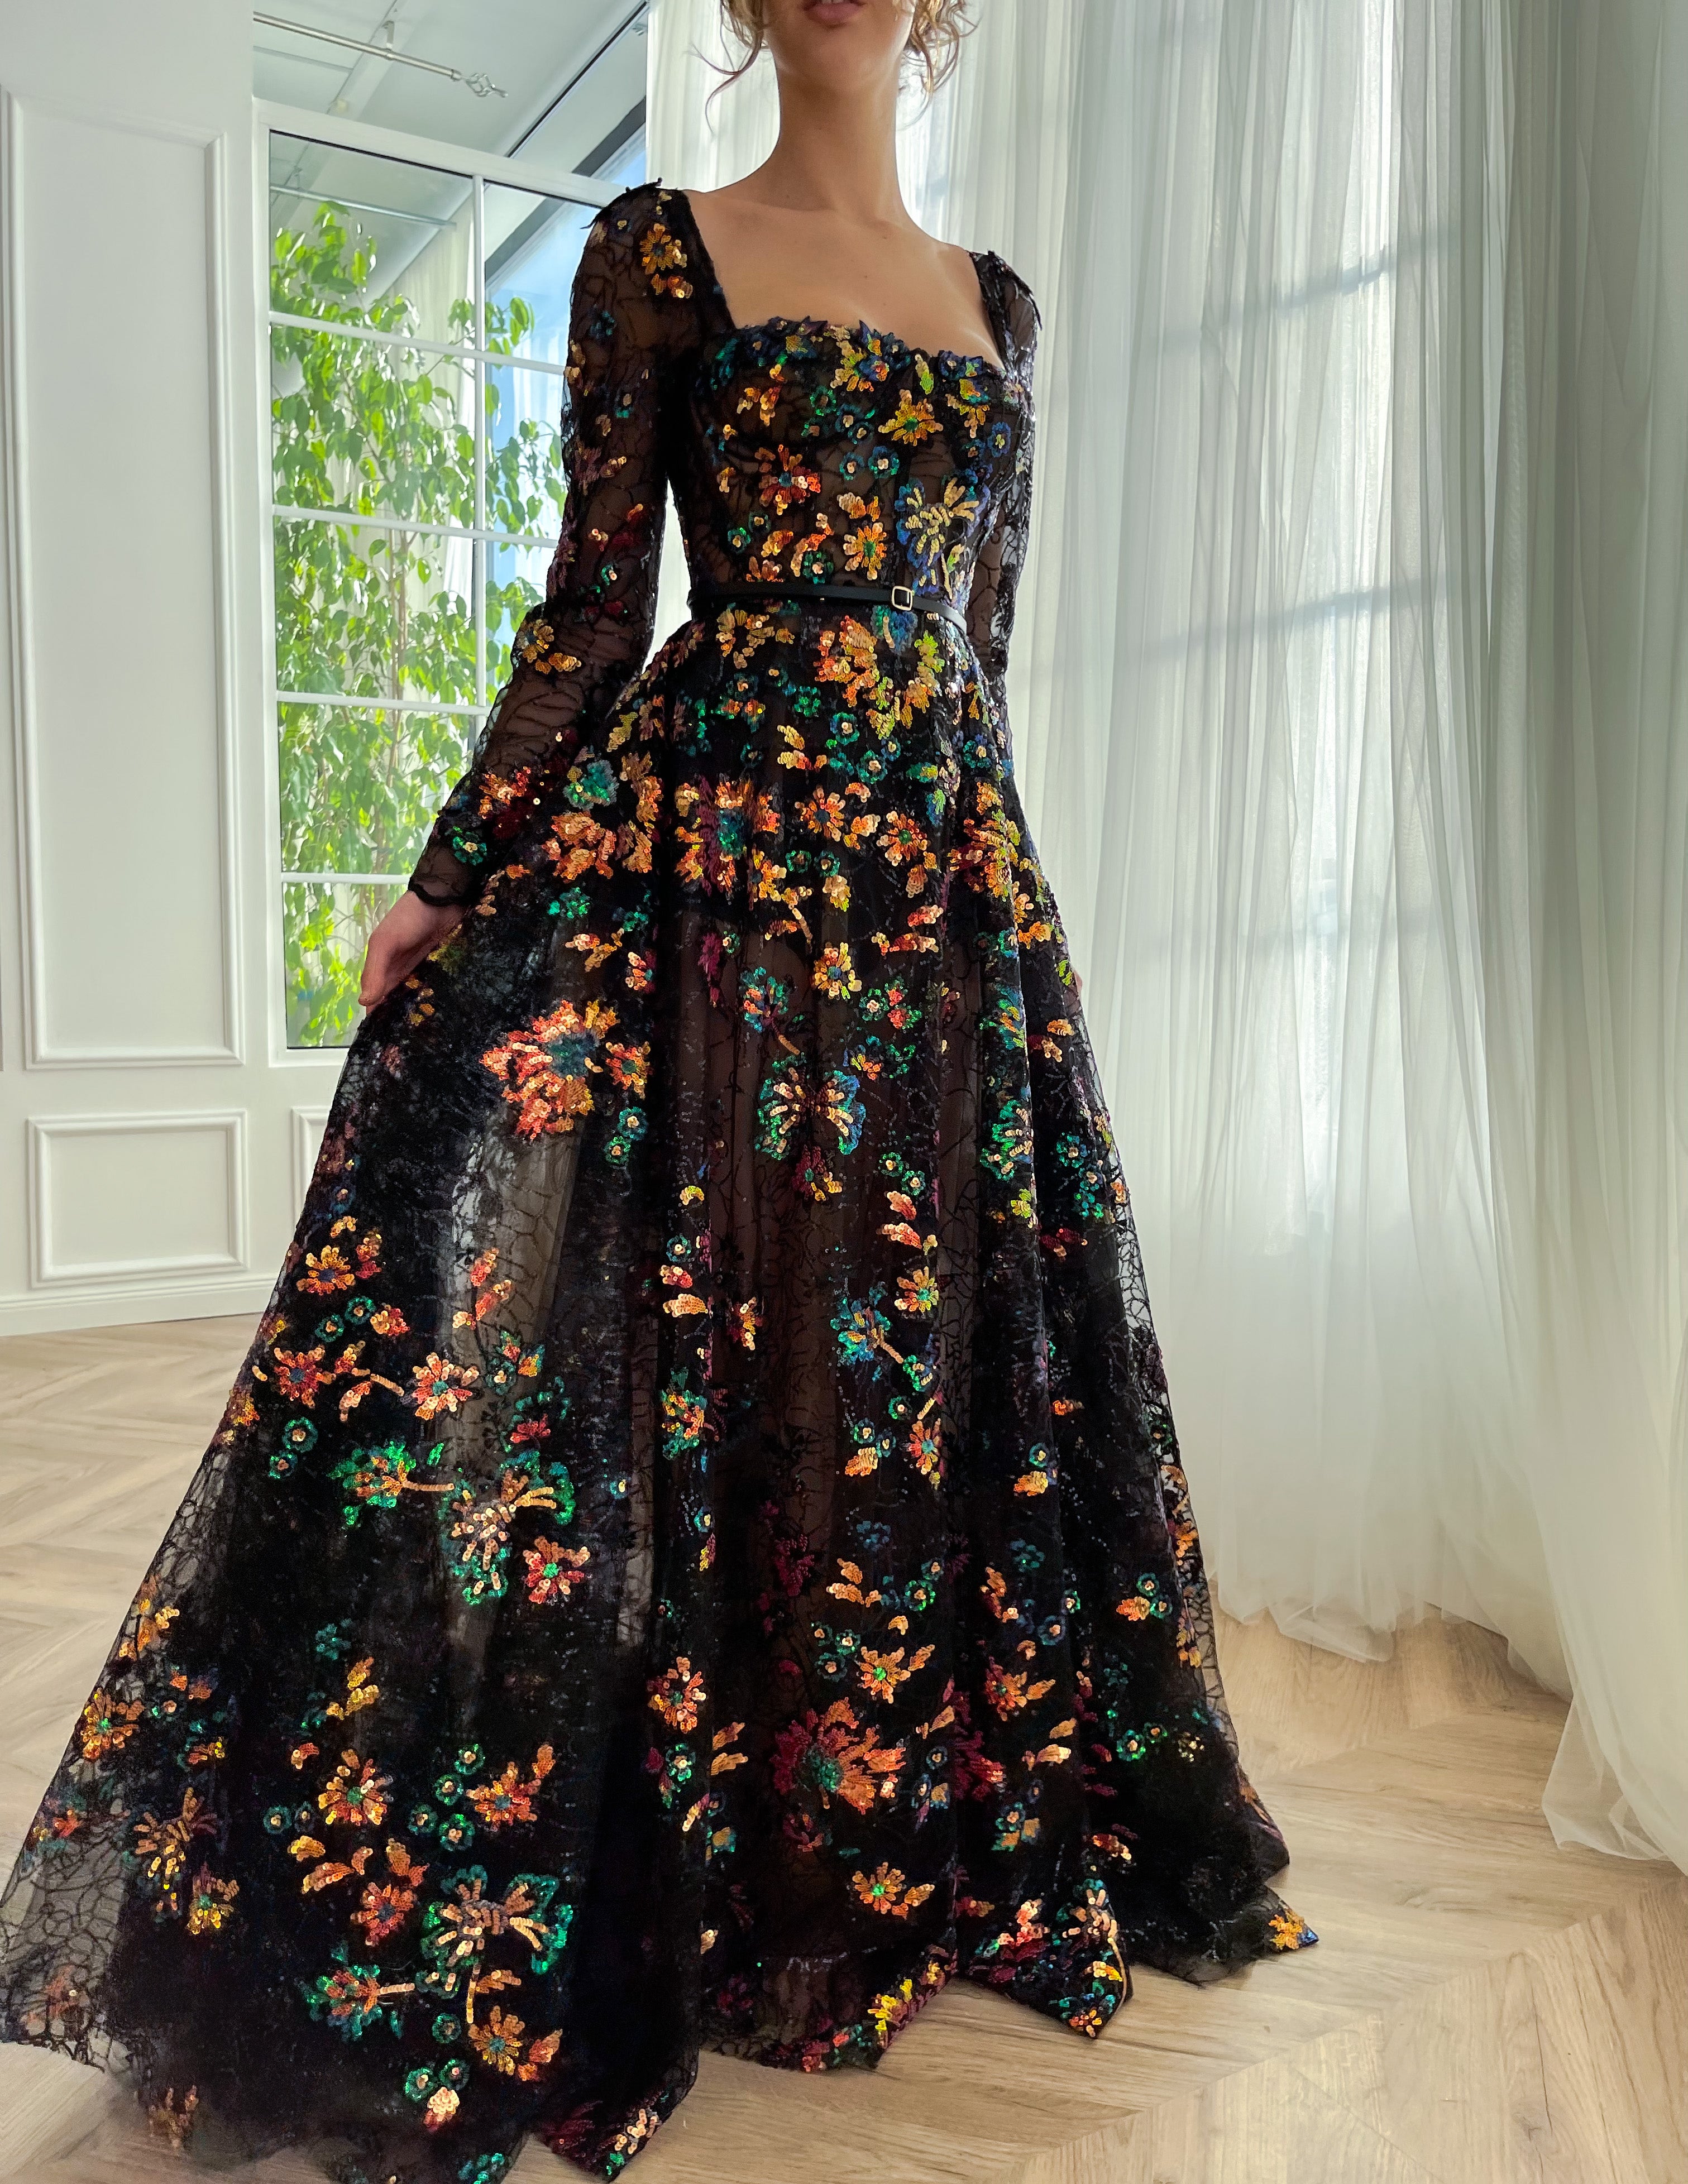 Black A-Line dress with flowers, embroidery, belt and long sleeves